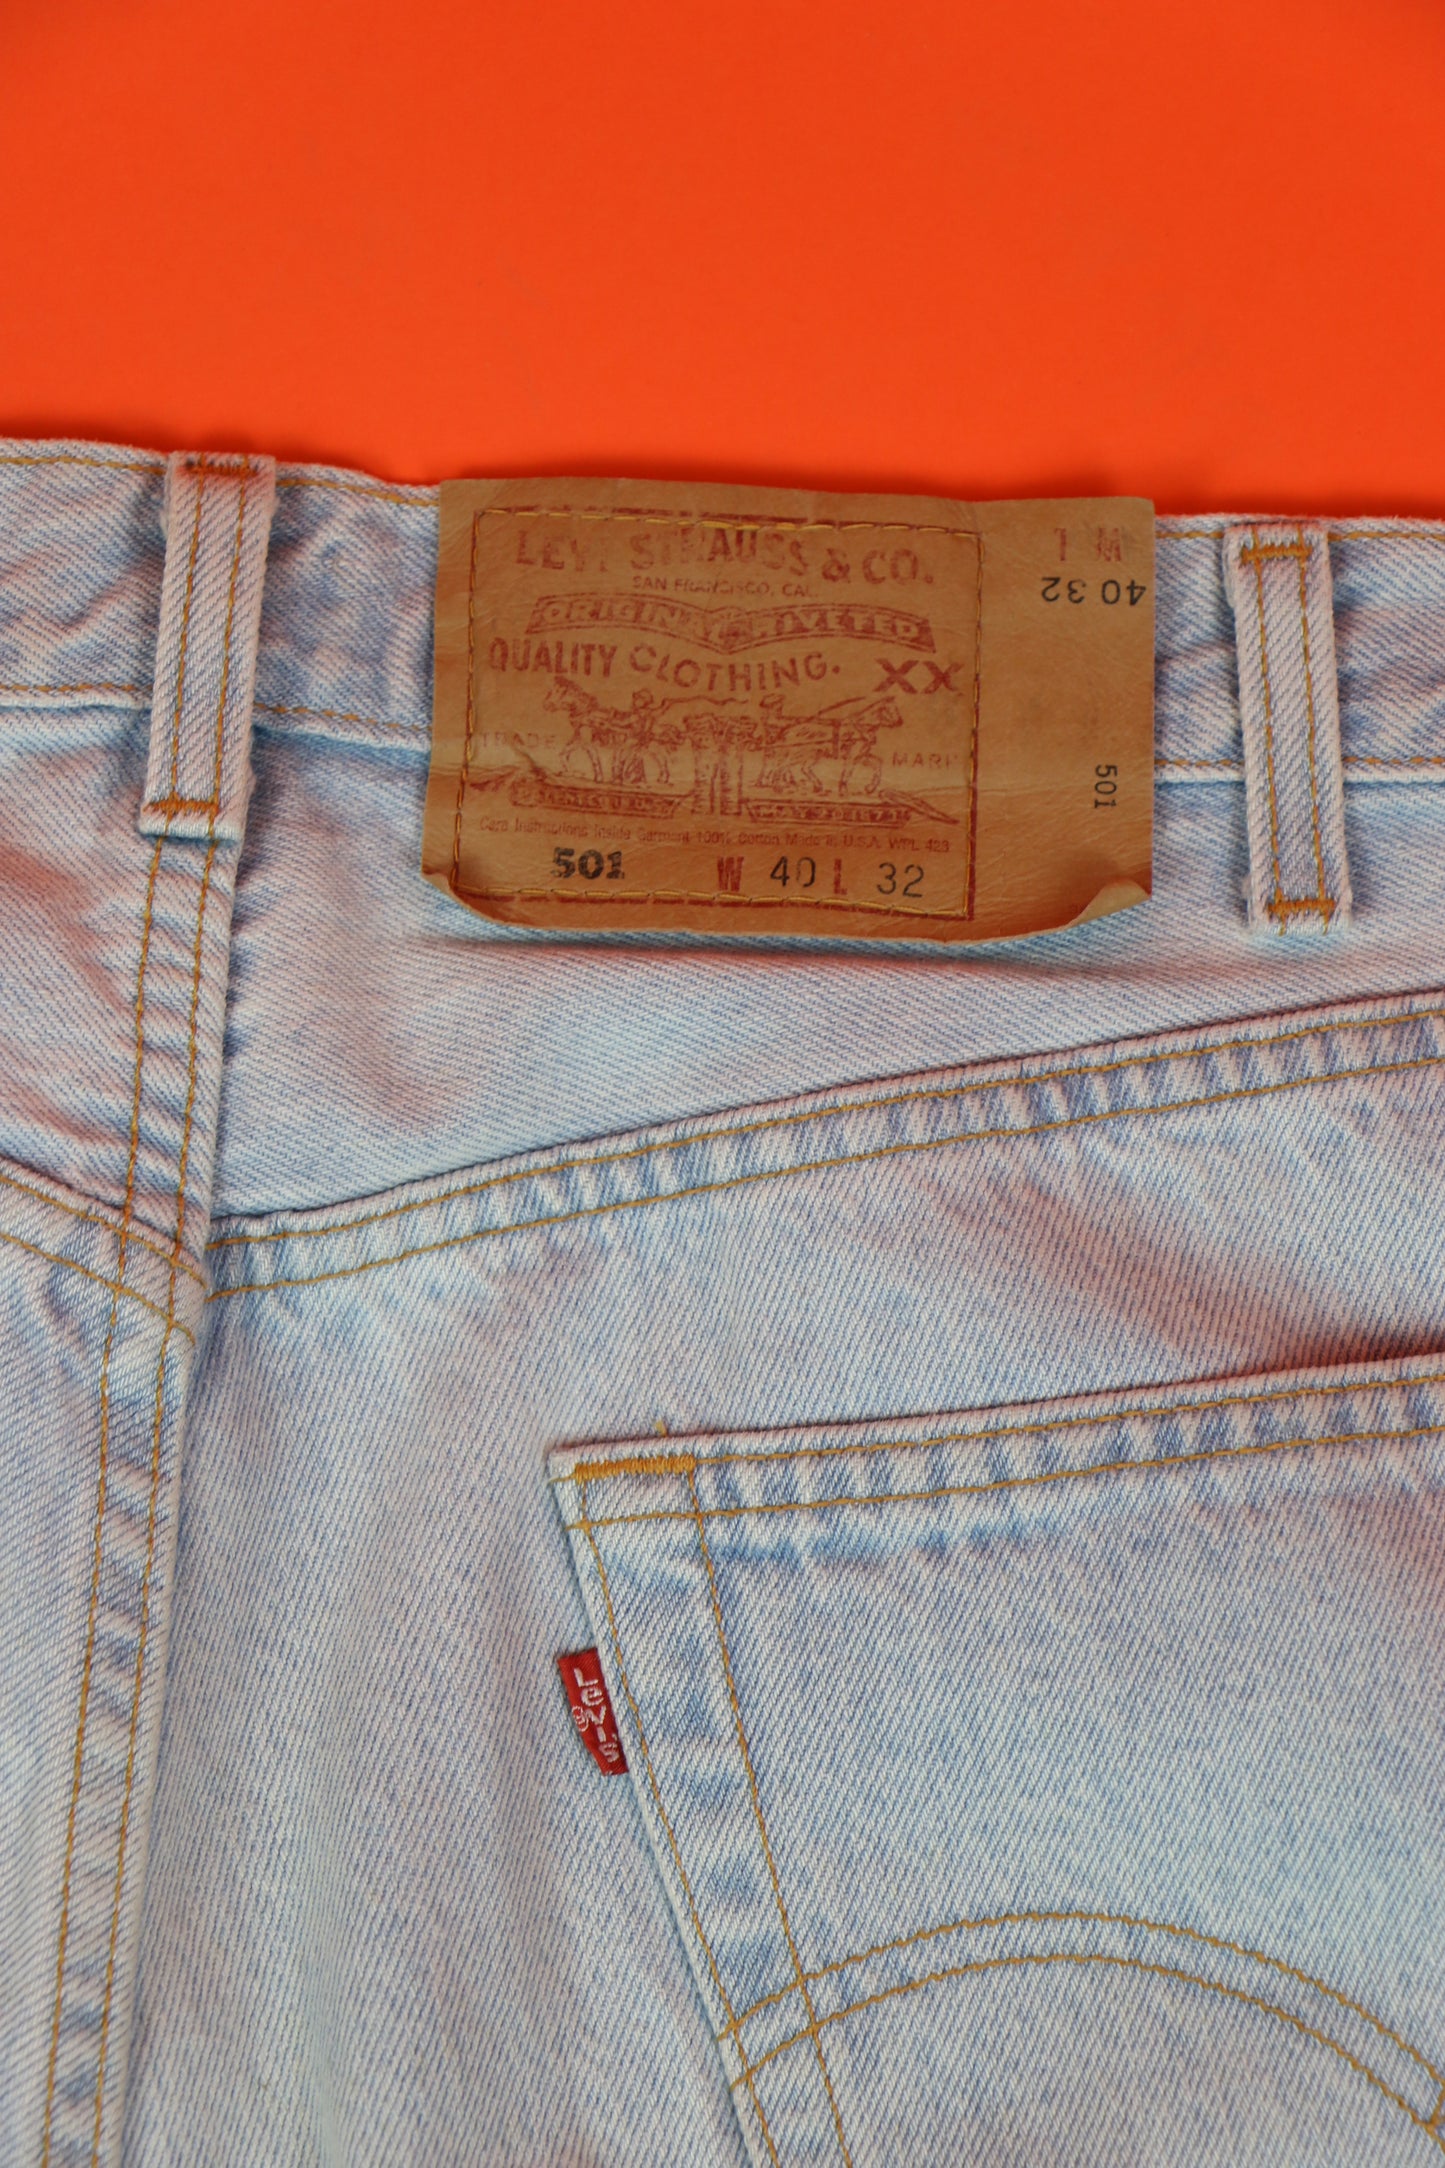 Levi's 501 Made in U.S.A. Jeans W40 L32 - vintage clothing clochard92.com